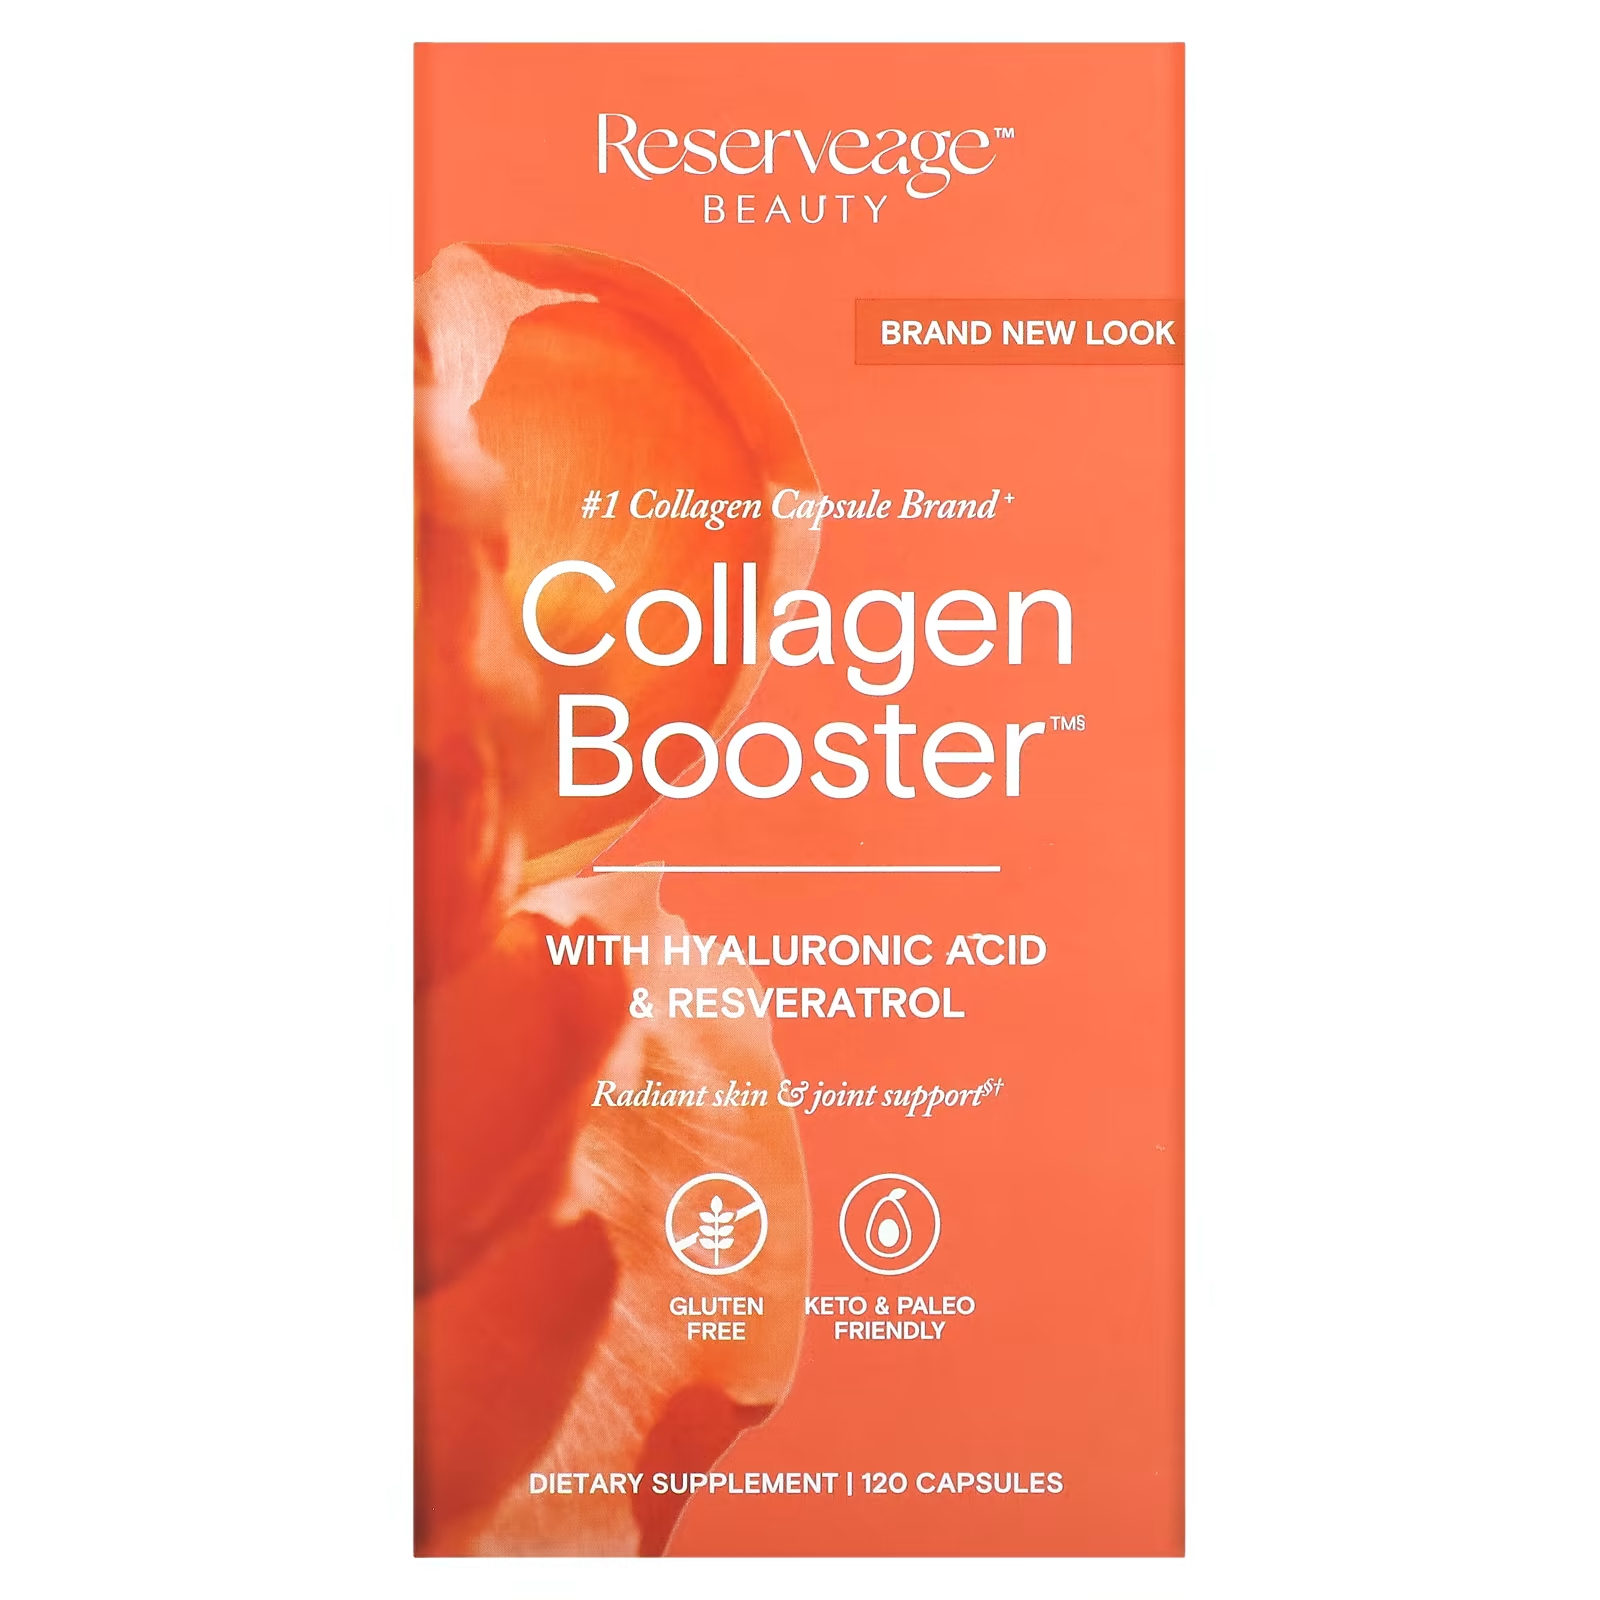 Пищевая добавка Reserveage Nutrition Collagen Booster with Hyaluronic Acid & Resveratrol, 120 капсул reserveage nutrition collagen booster добавка с коллагеном 120 капсул